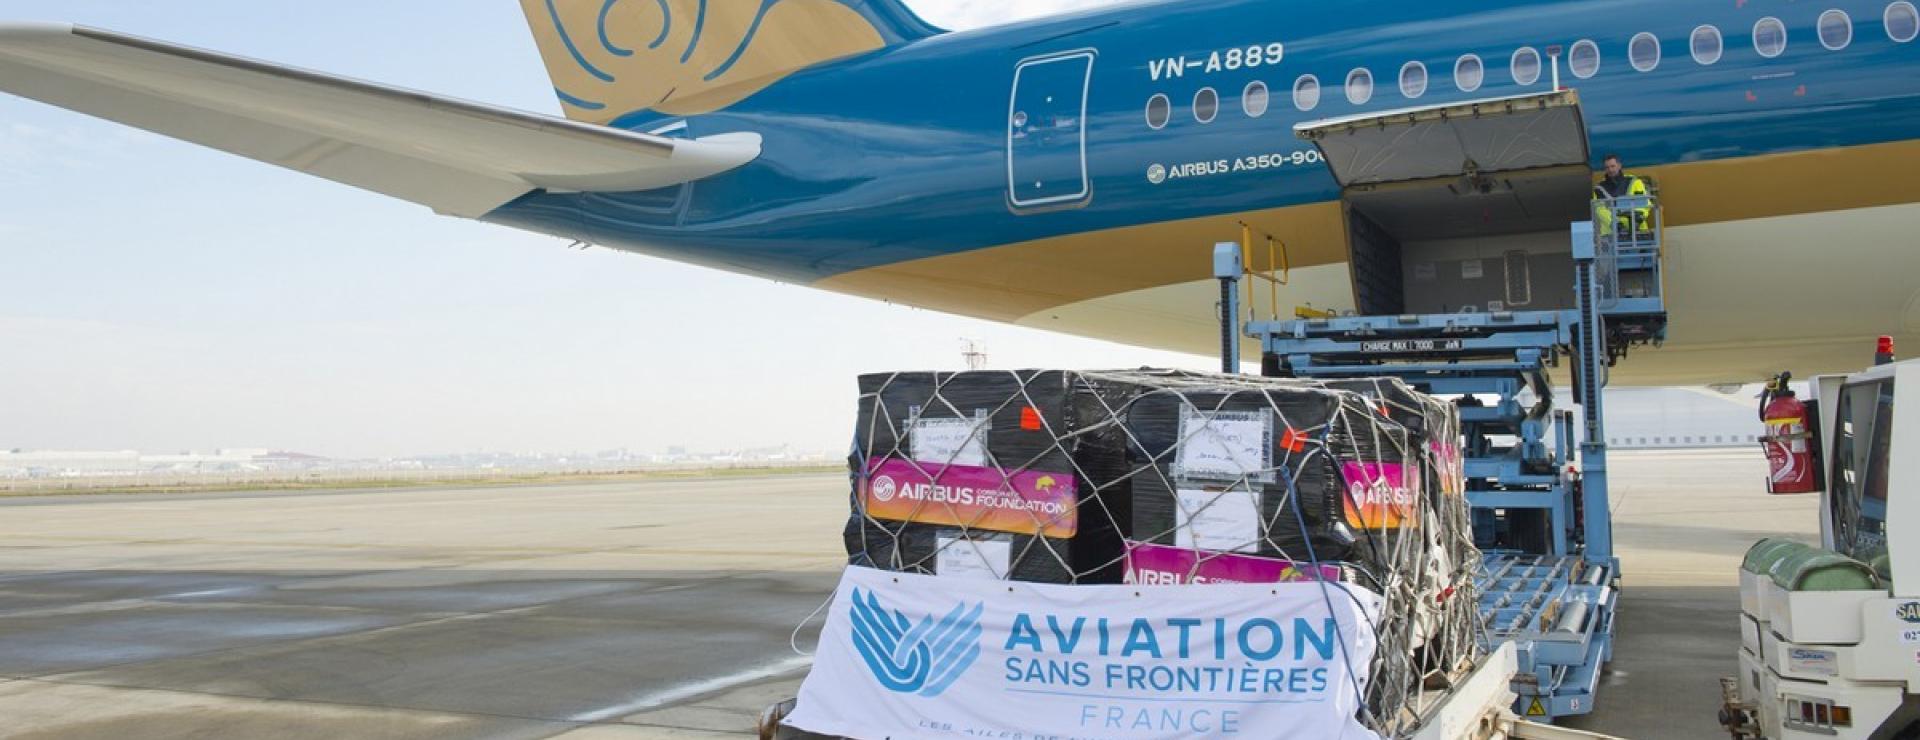 airbus_foundation_and_vietnam_airlines_fly_toys_to_hanoi